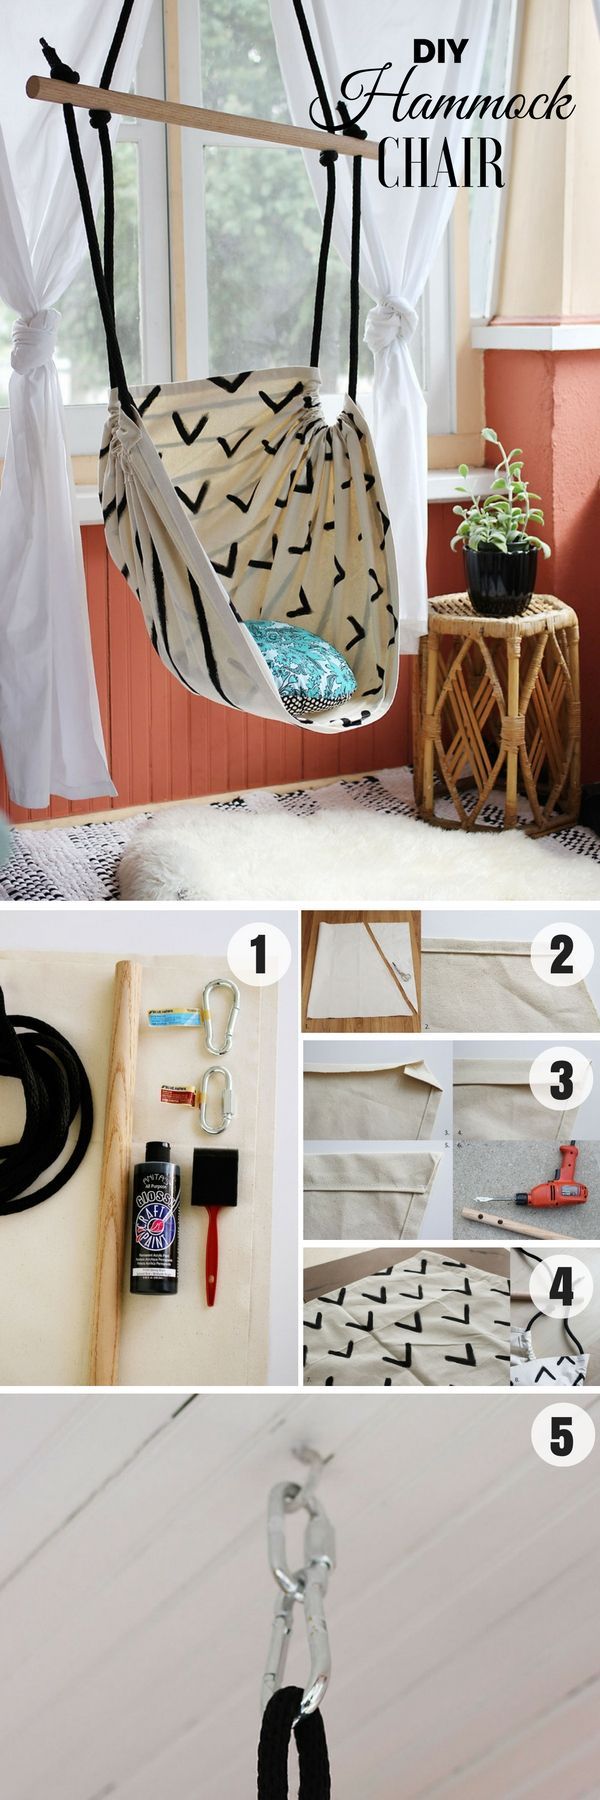 How to make an easy DIY Hammock Chair for bedroom